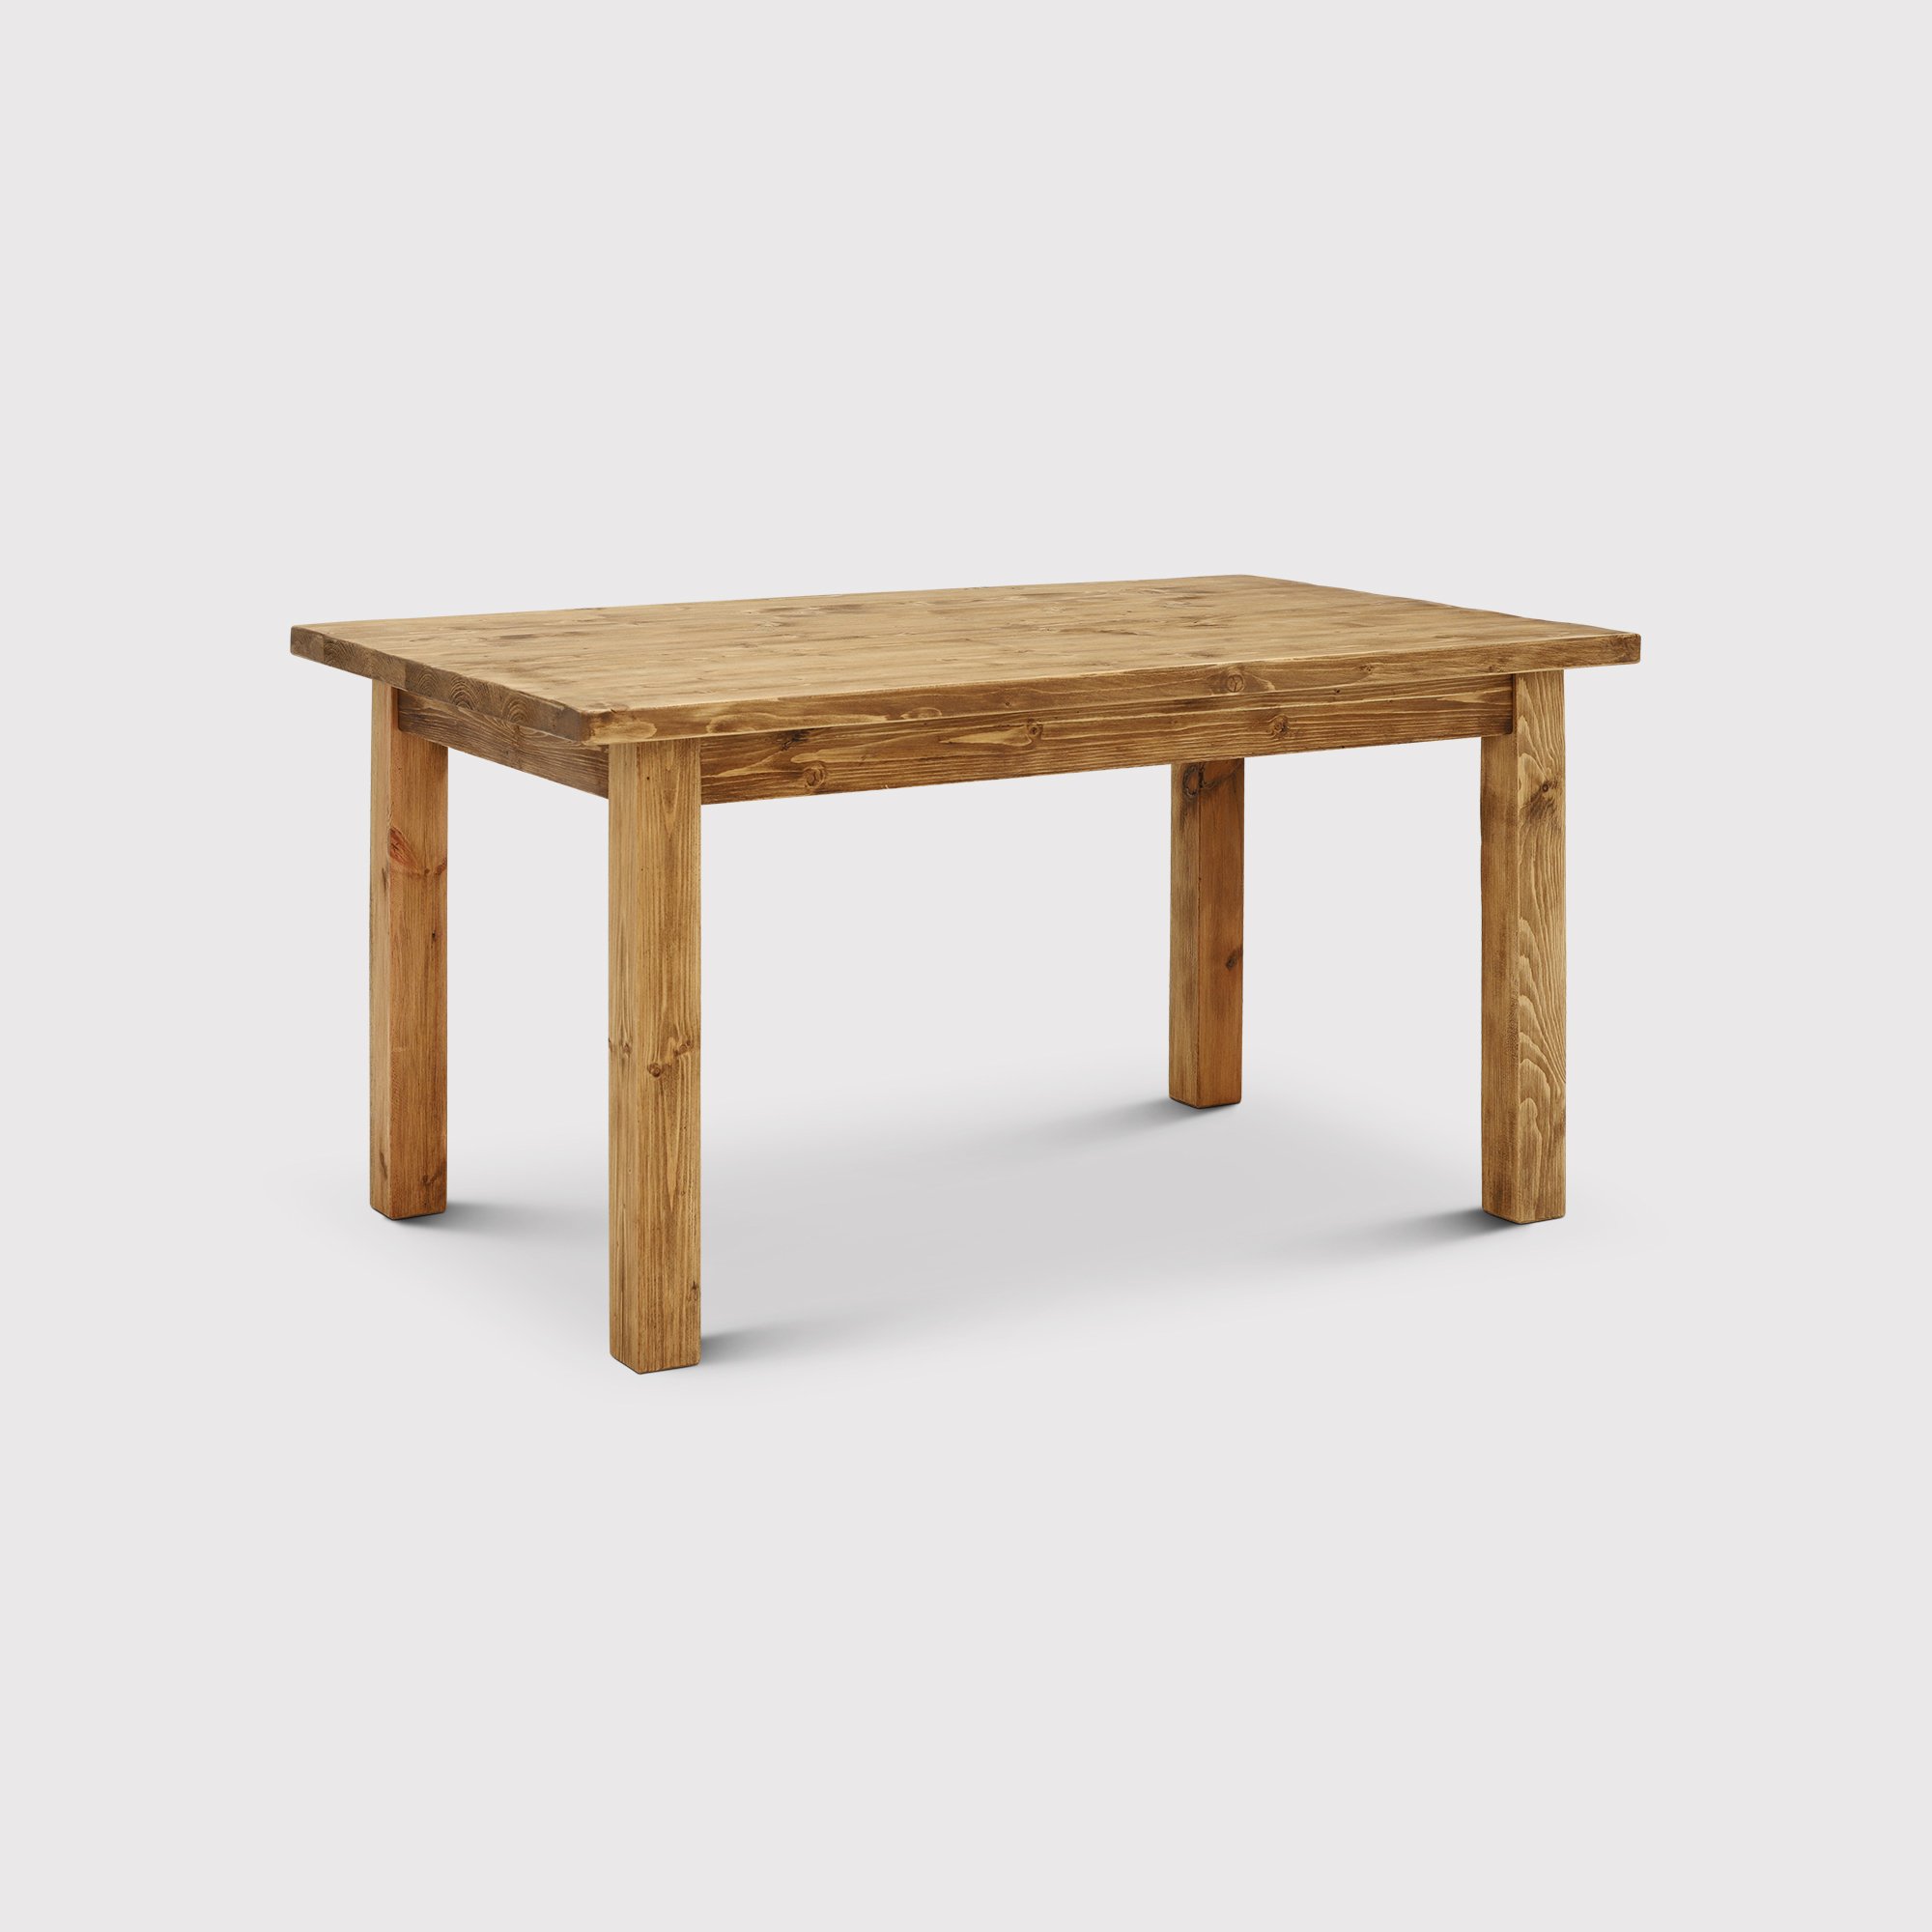 Covington Dining Table 150cm, Timber Wood | Barker & Stonehouse